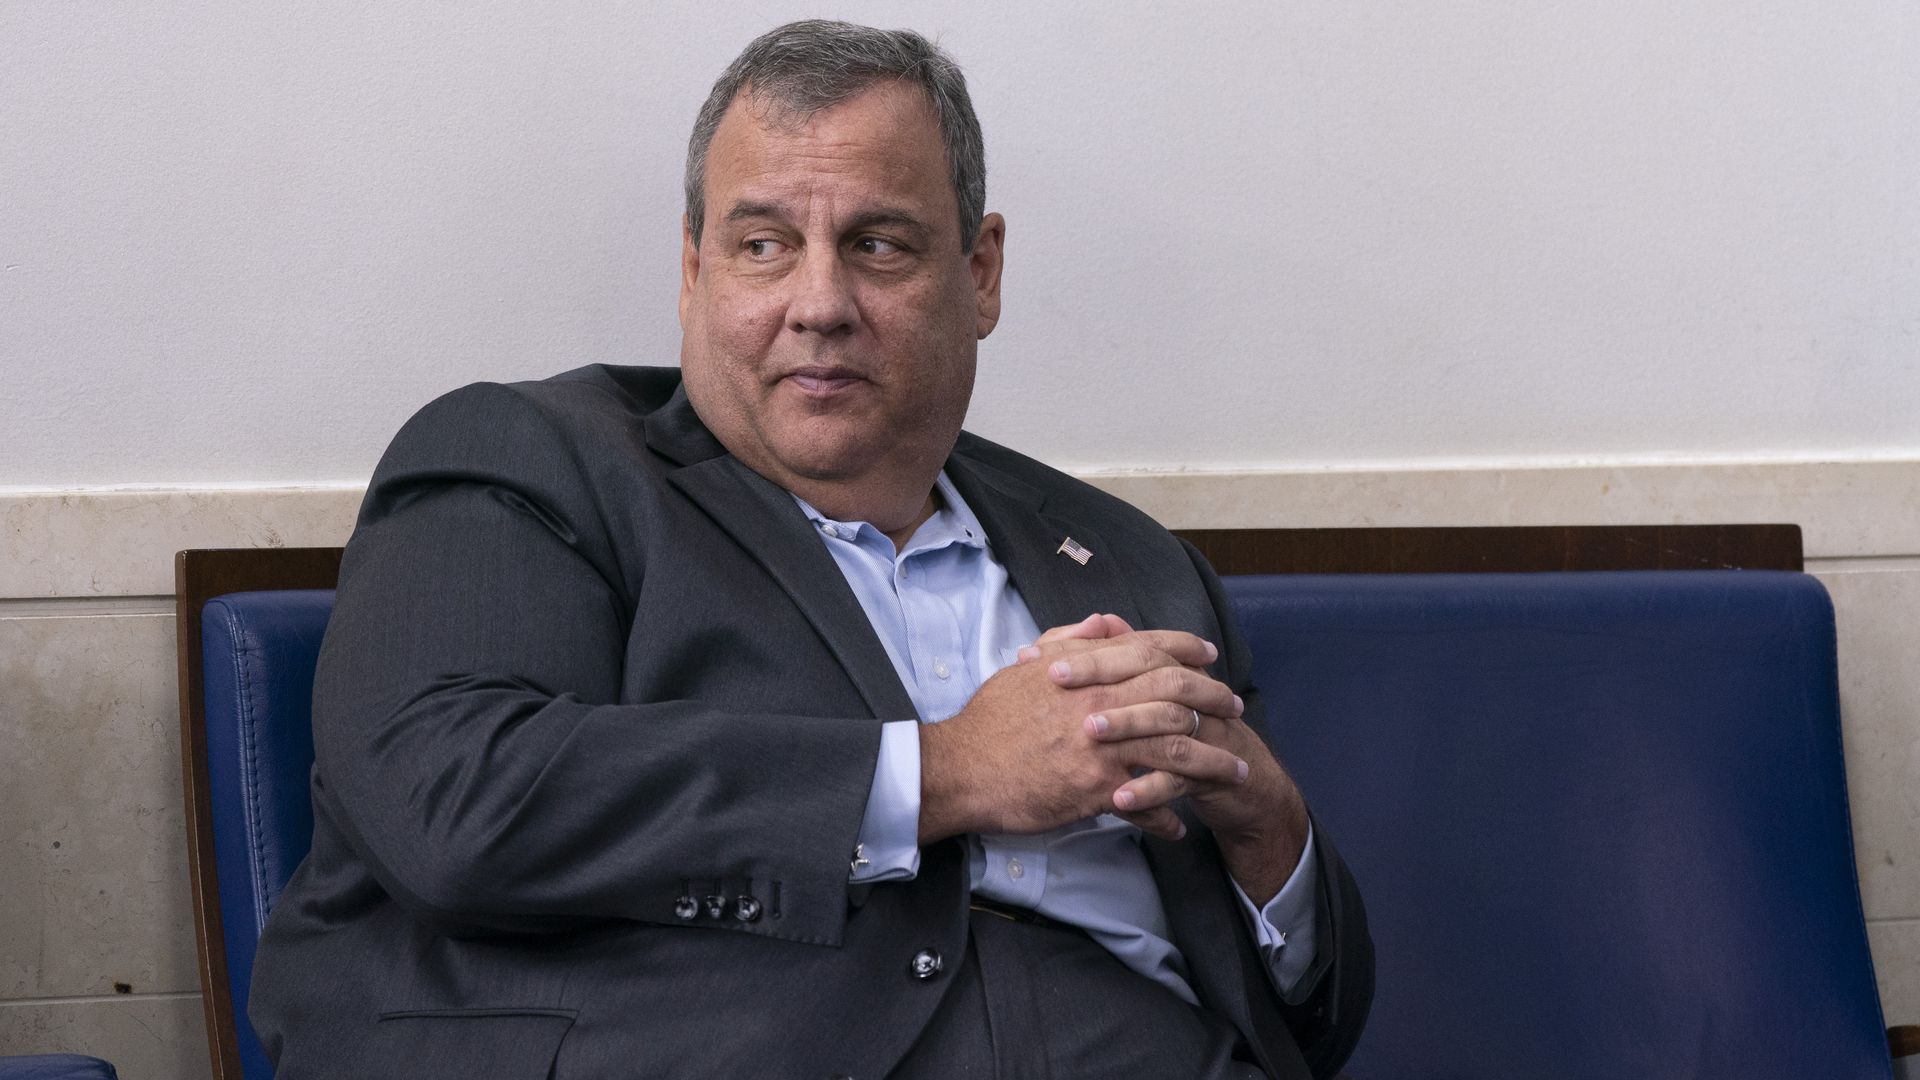 Former New Jersey Gov. Chris Christie sits in a blue chair at the White House in 2020 slightly smiling and looking sideways with his hands clasped